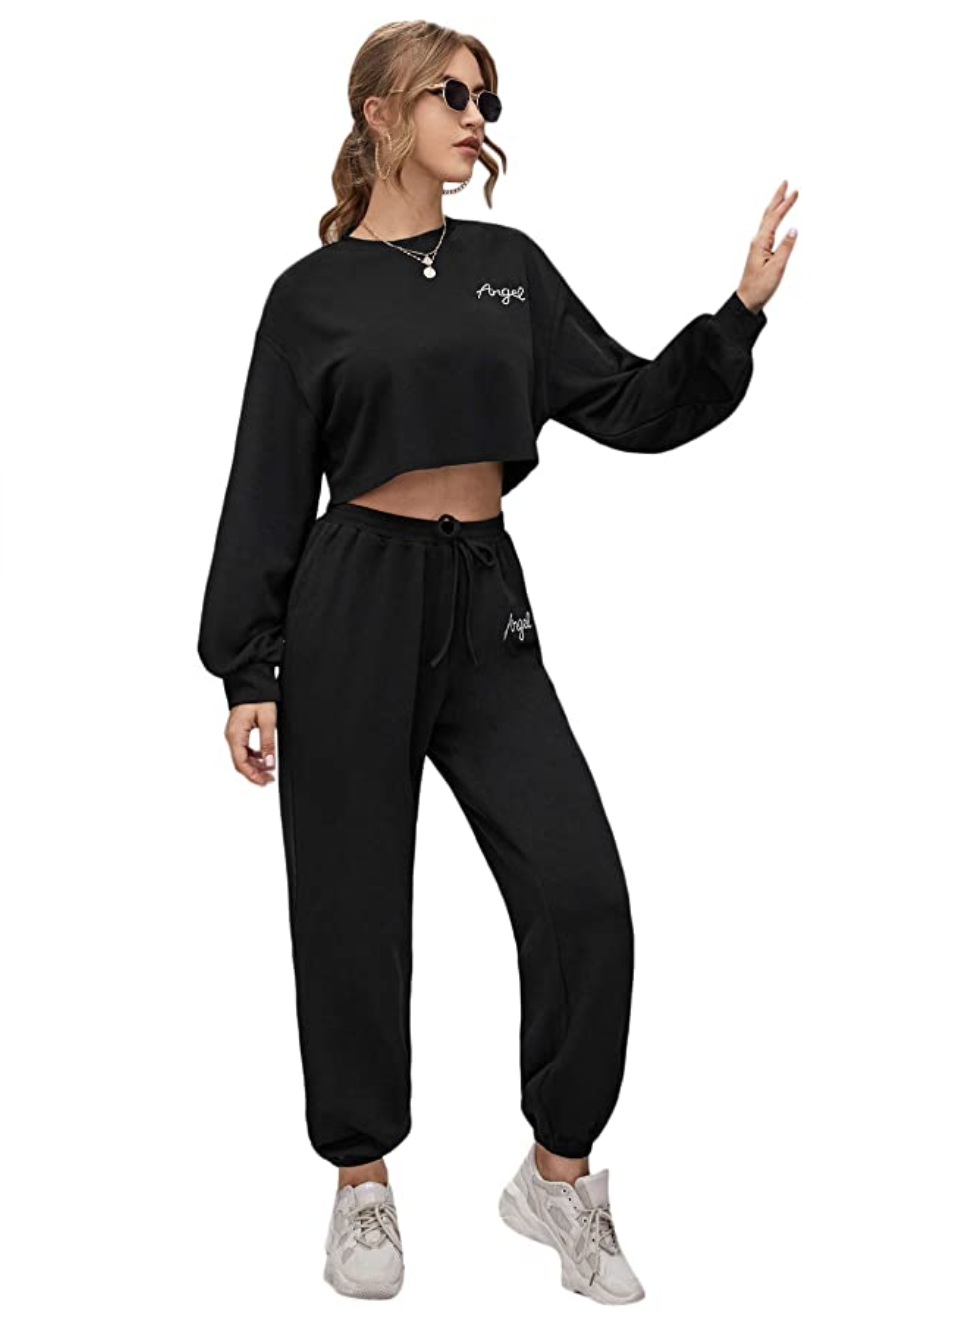 SweatyRocks Womens 2 Pieces Outfits Long Sleeve Crop Top and Sweatpants Jogger Set